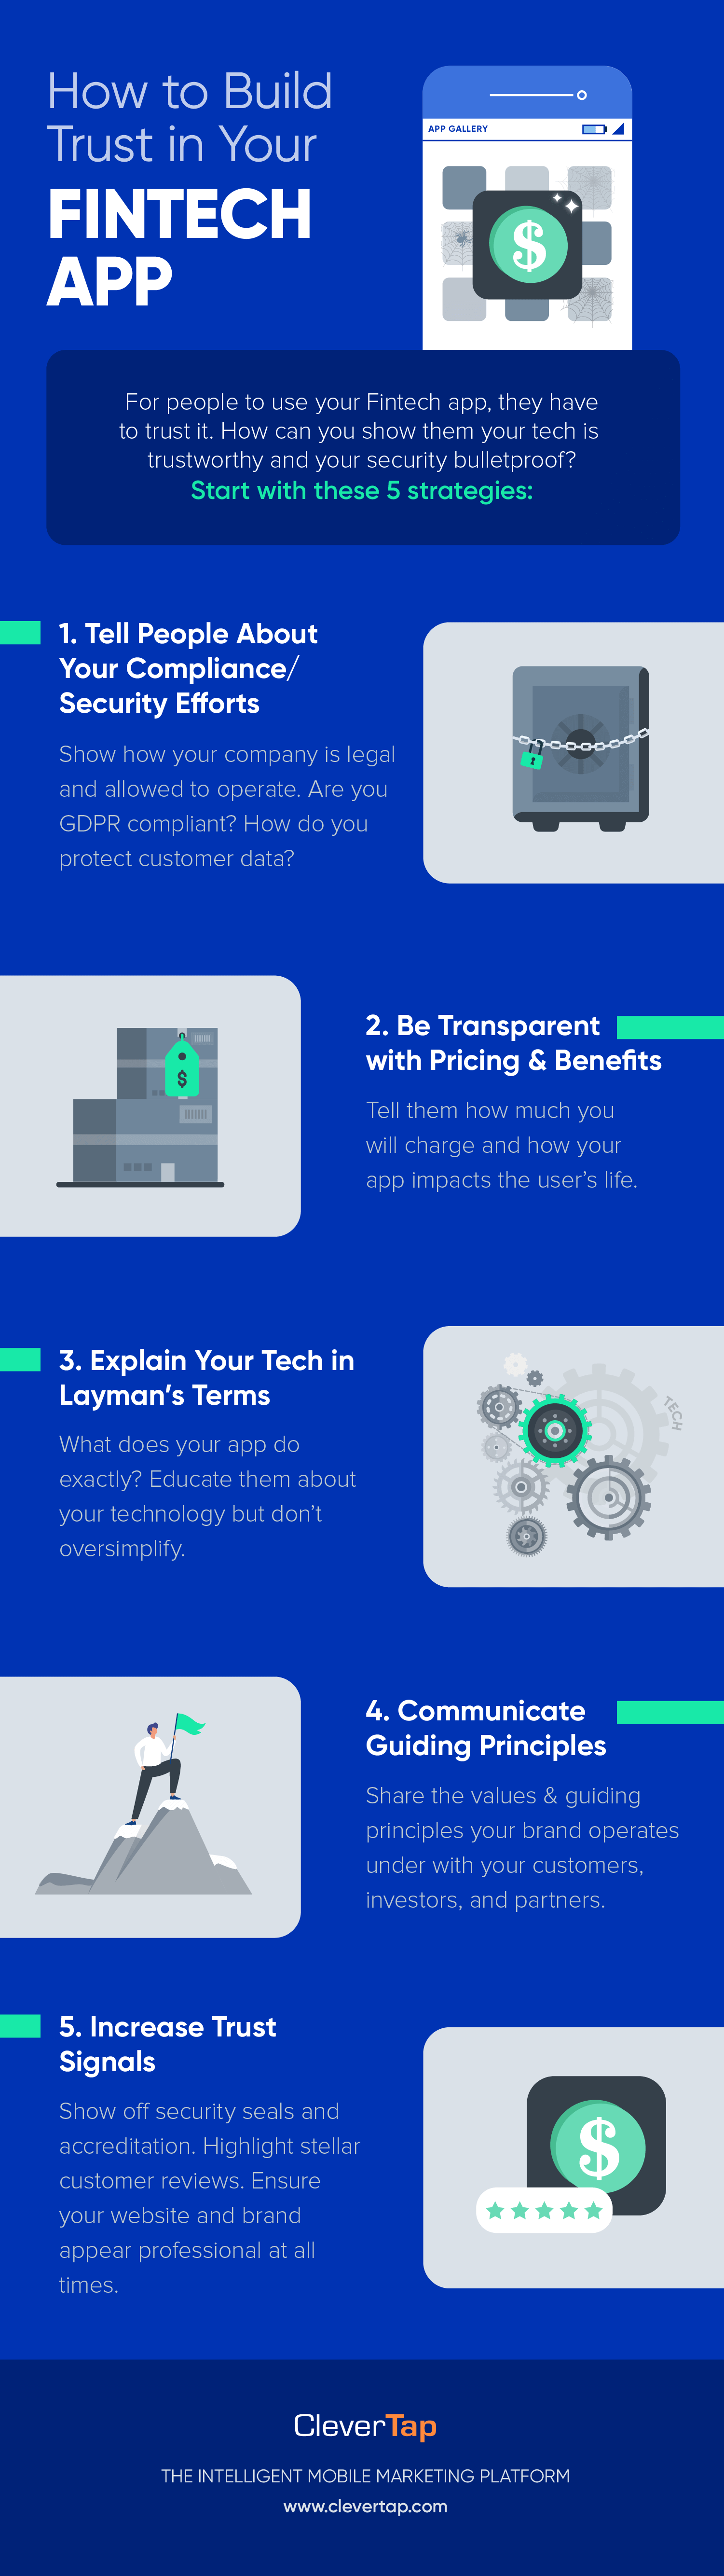 Infographic - How to Build Trust in your Fintech App